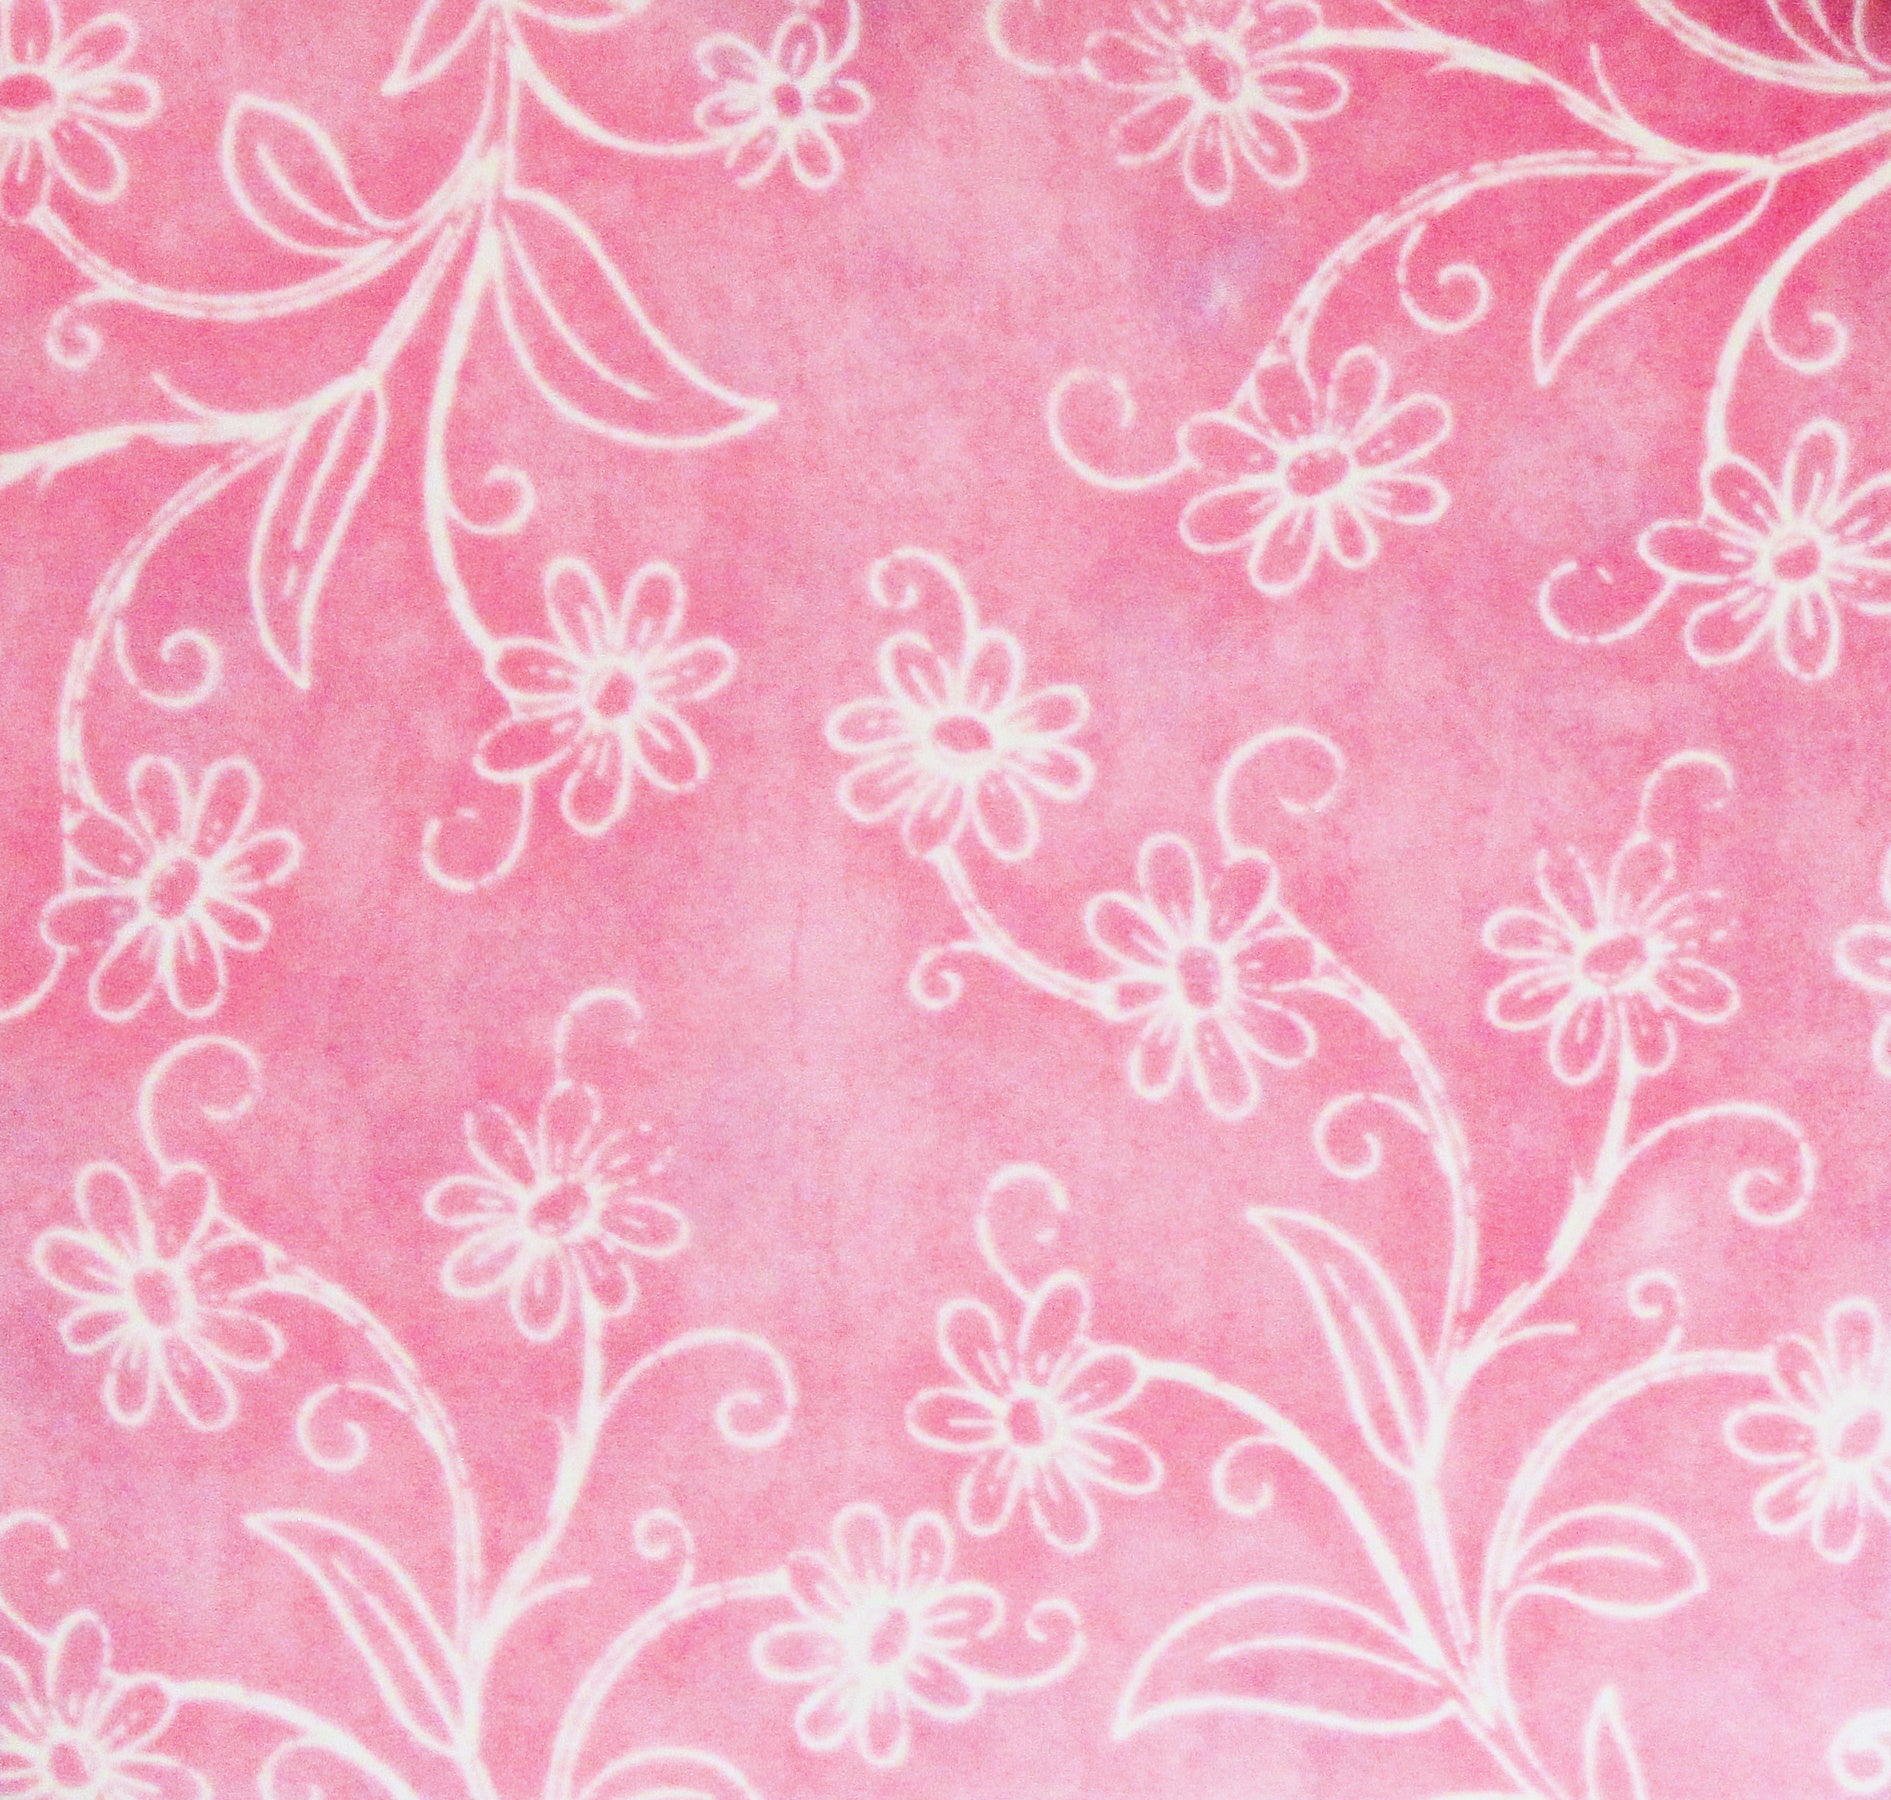 DCWV 12 X 12 Pink Flowers White Outline Scrapbook Paper